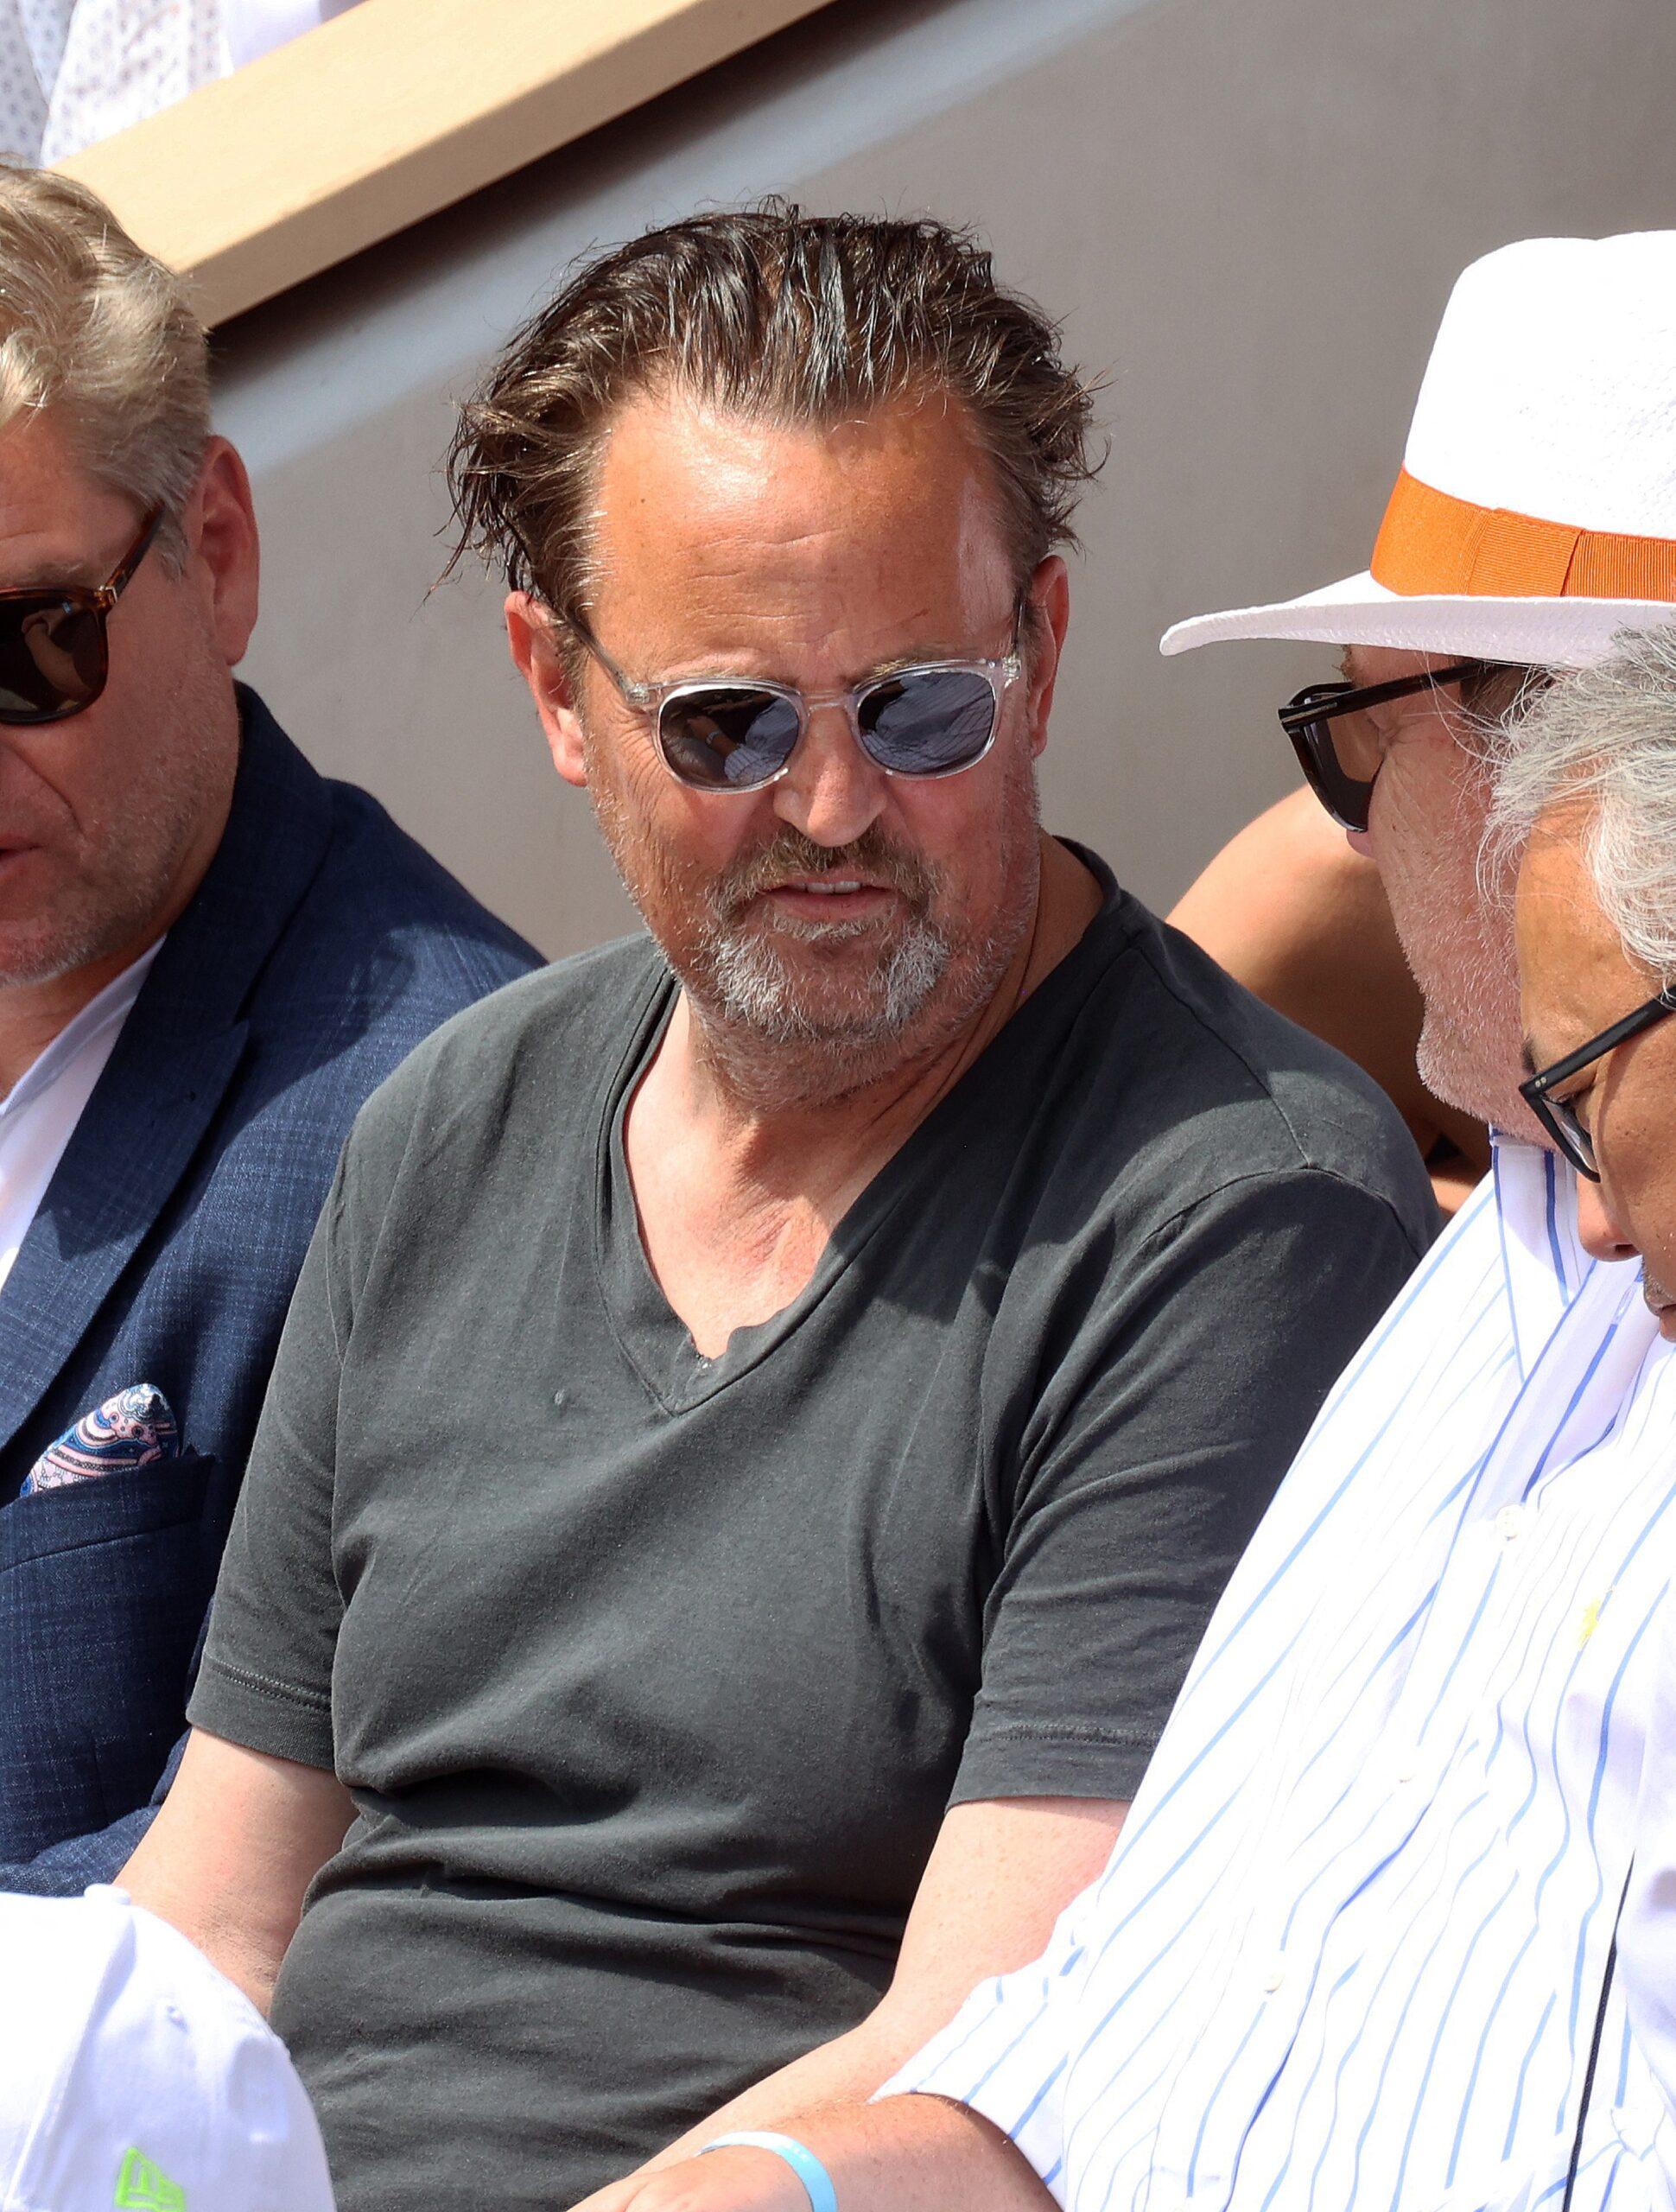 Matthew Perry's Final Words To Fans Were Quite Odd